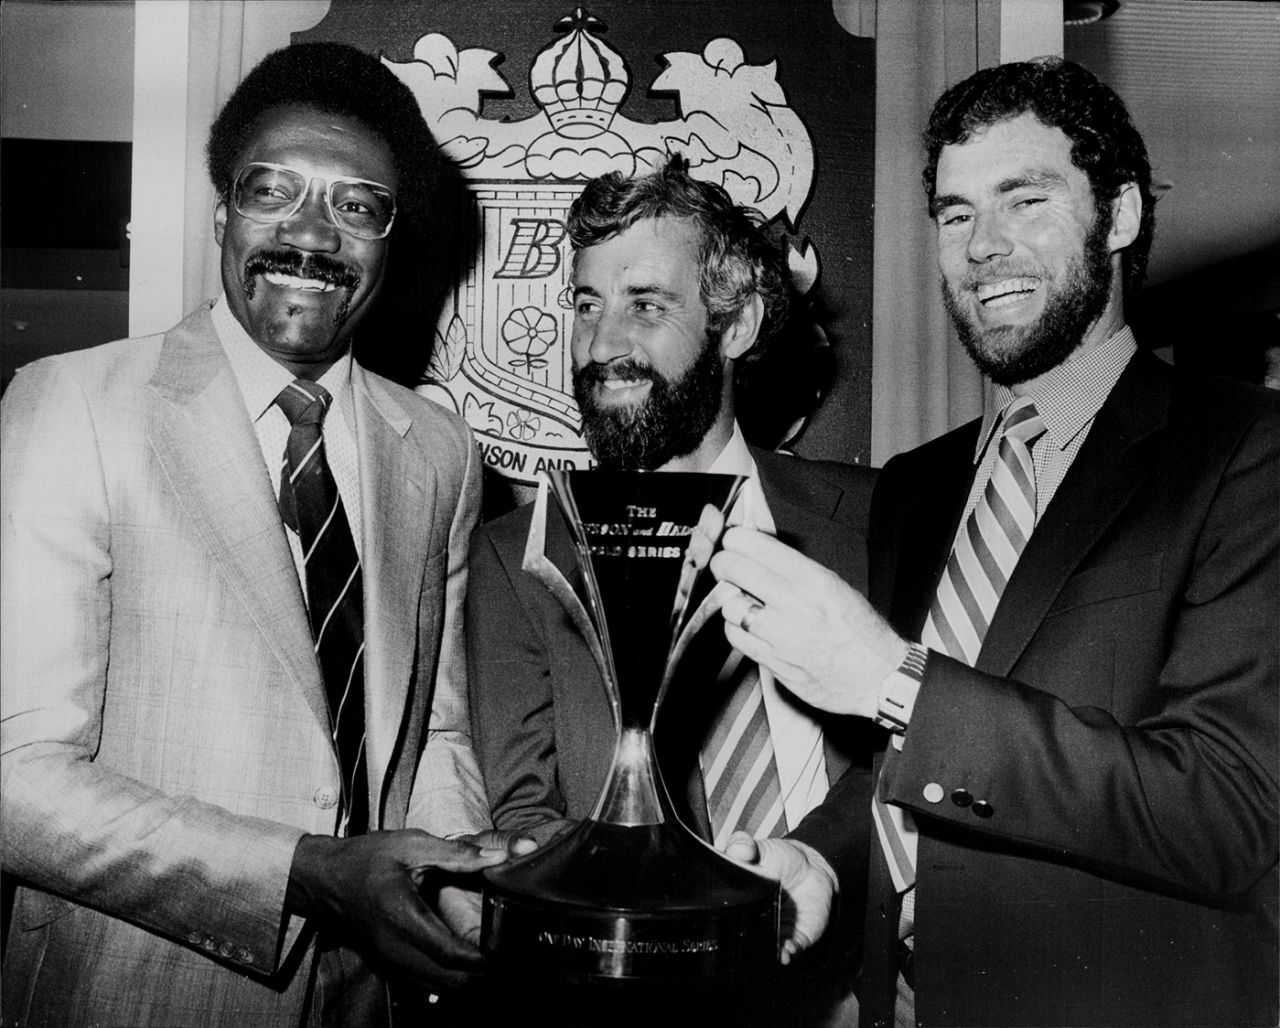 Clive Lloyd, Mike Brearley and Greg Chappell with the Benson & Hedges Cup in Sydney, November 26, 1979